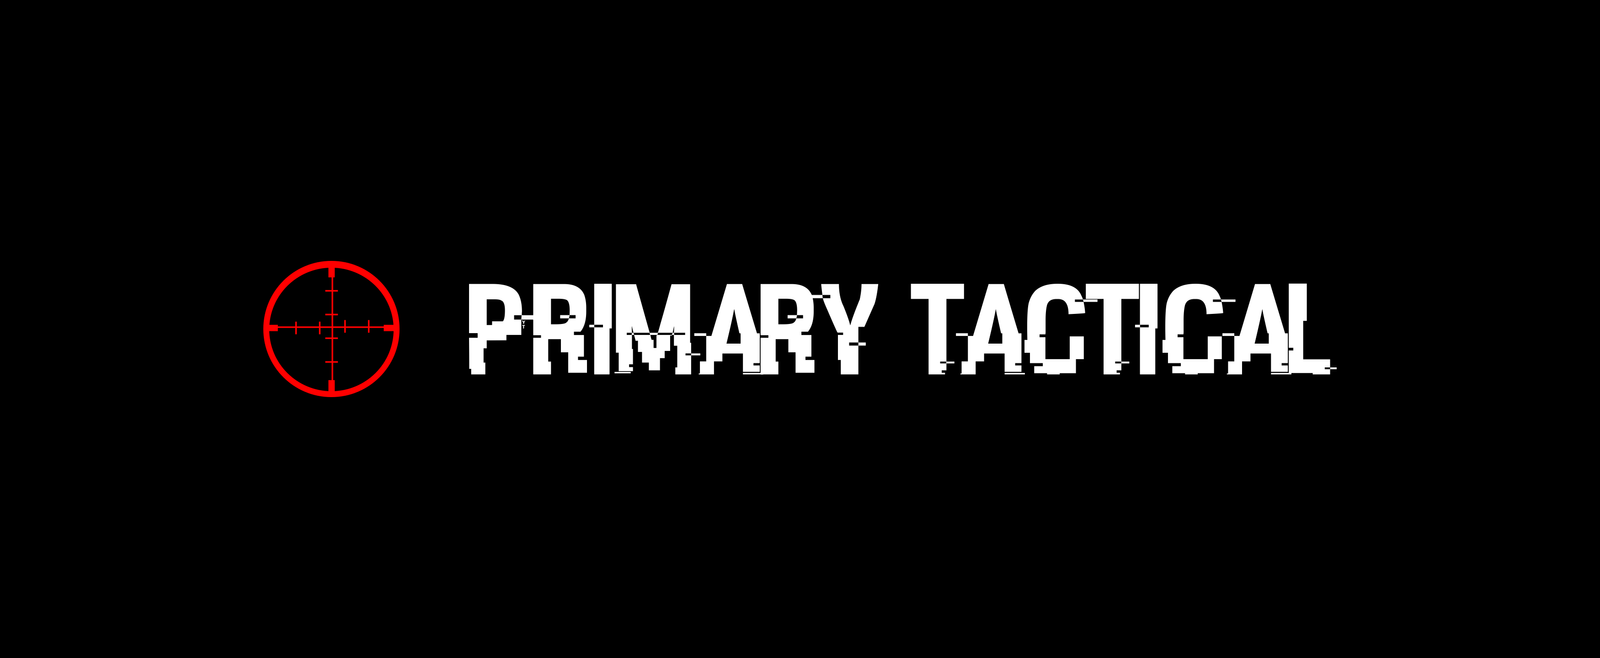 Tactical Gear – Primary Tactical